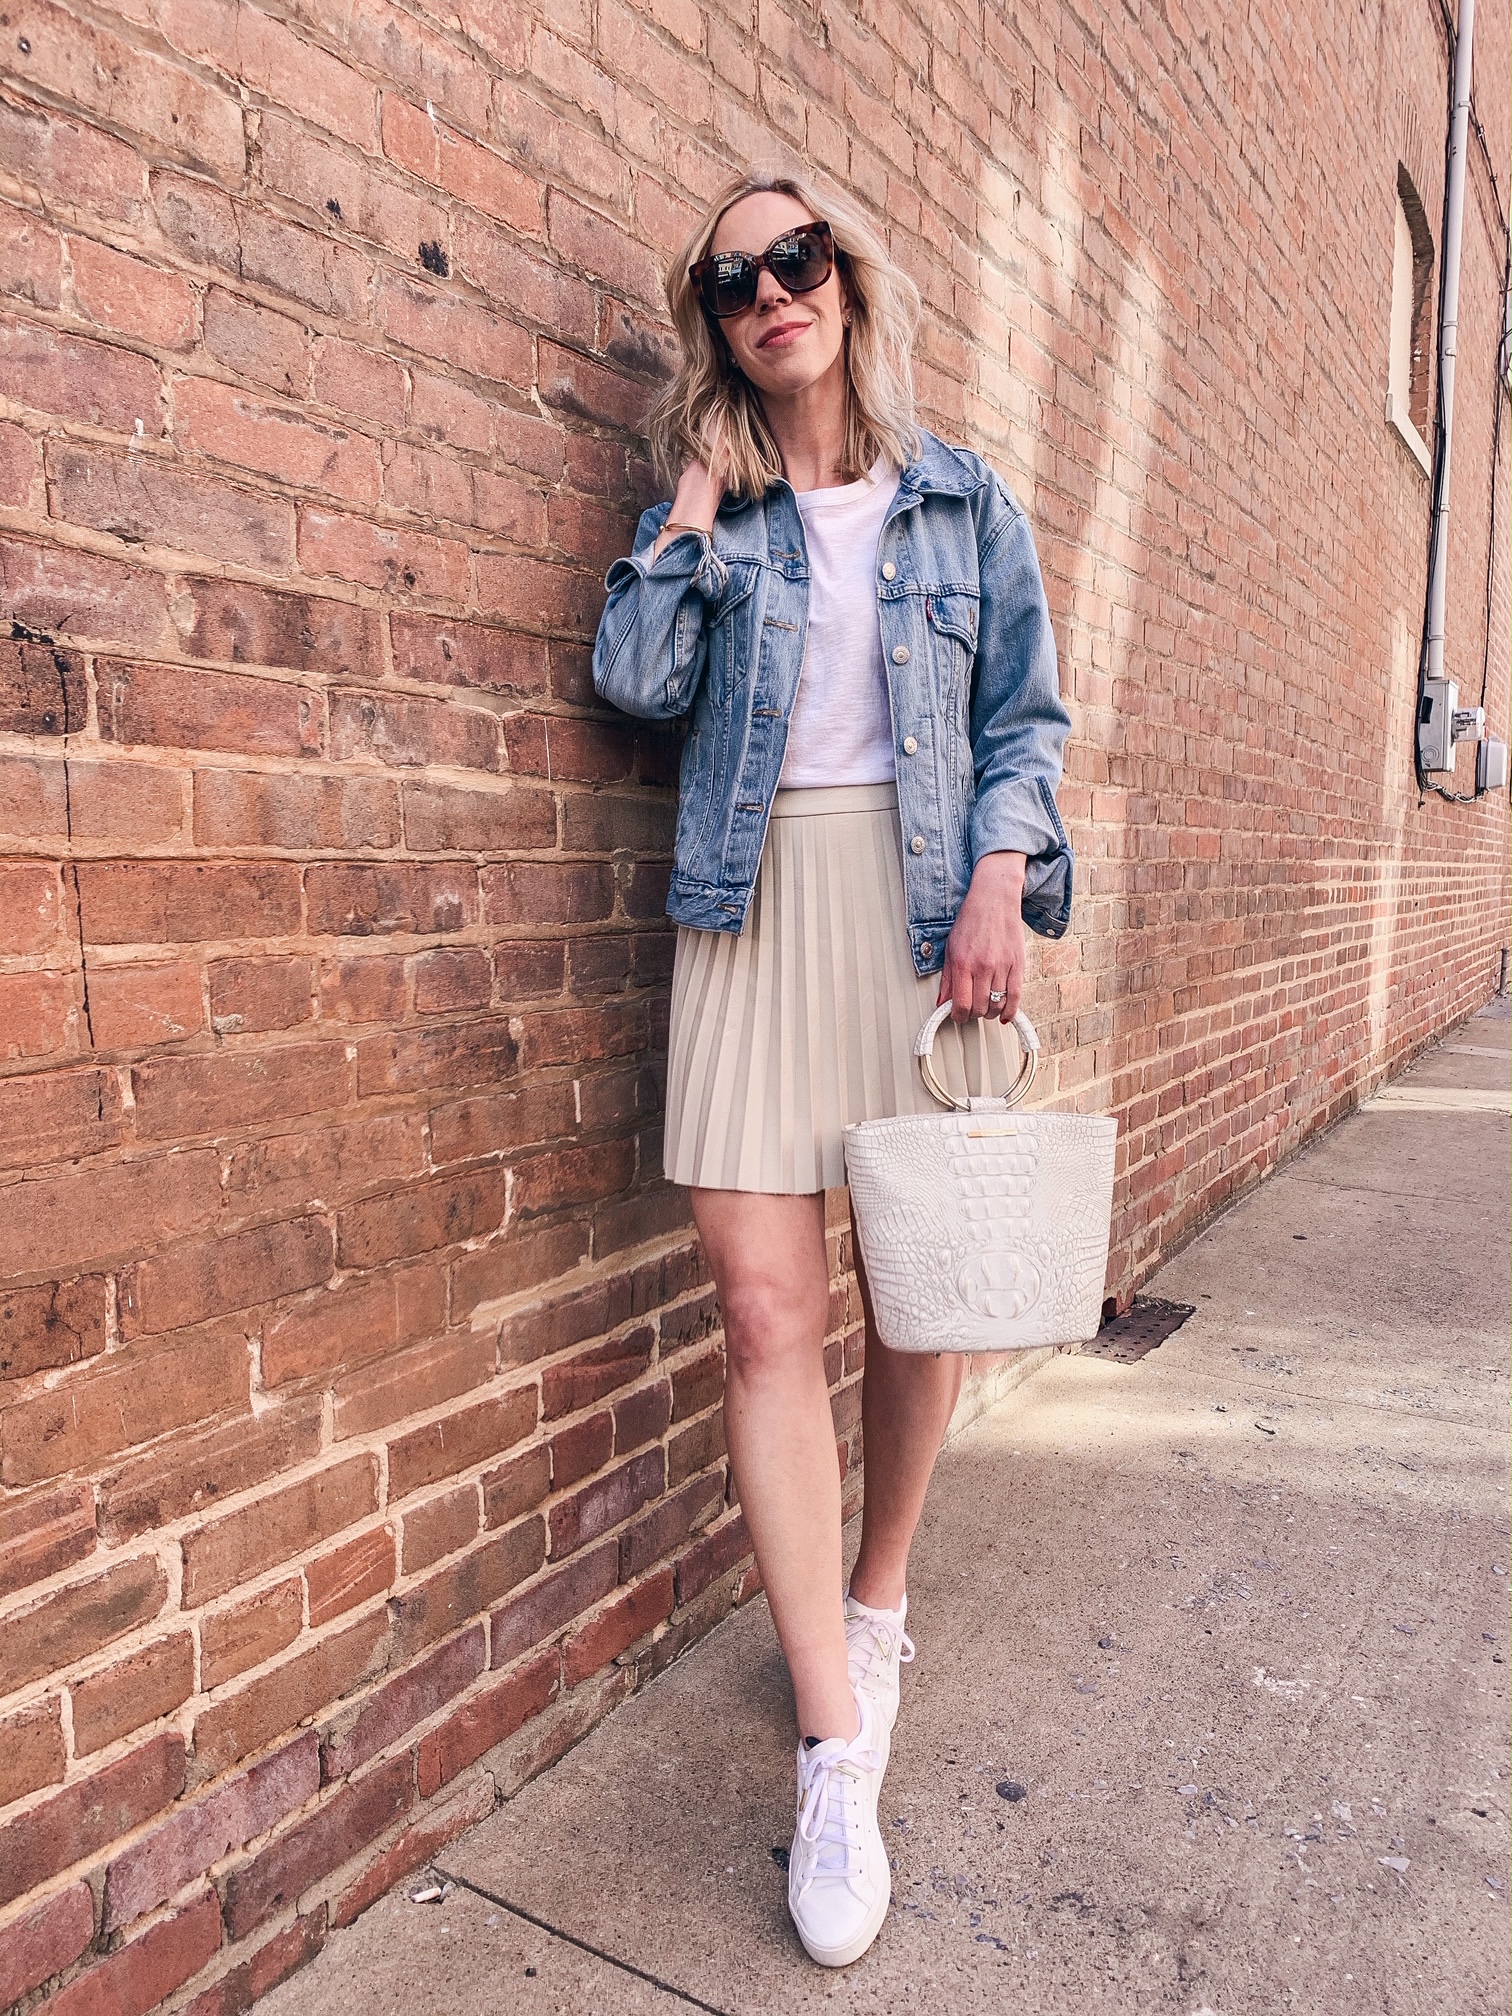 https://meagansmoda.com/wp-content/uploads/2020/03/Meagan-Brandon-fashion-blogger-of-Meagans-Moda-wears-denim-jacket-with-beige-faux-leather-pleated-skirt-and-white-sneakers.jpg